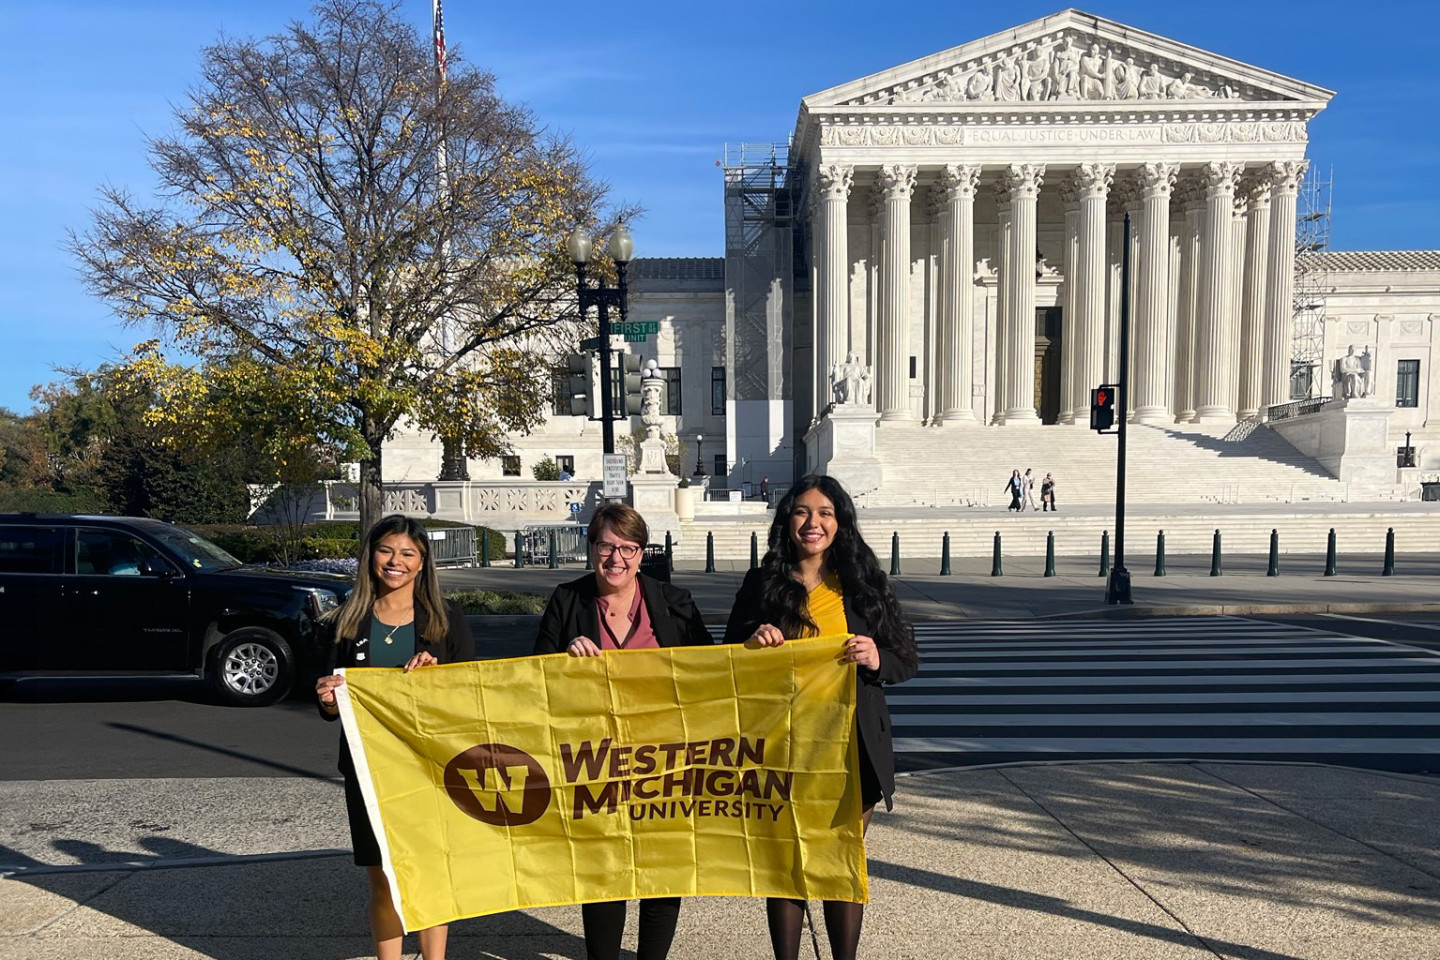 Three people hold a gold-colored Western Michigan University flag in front of the U.S. Supreme Court.